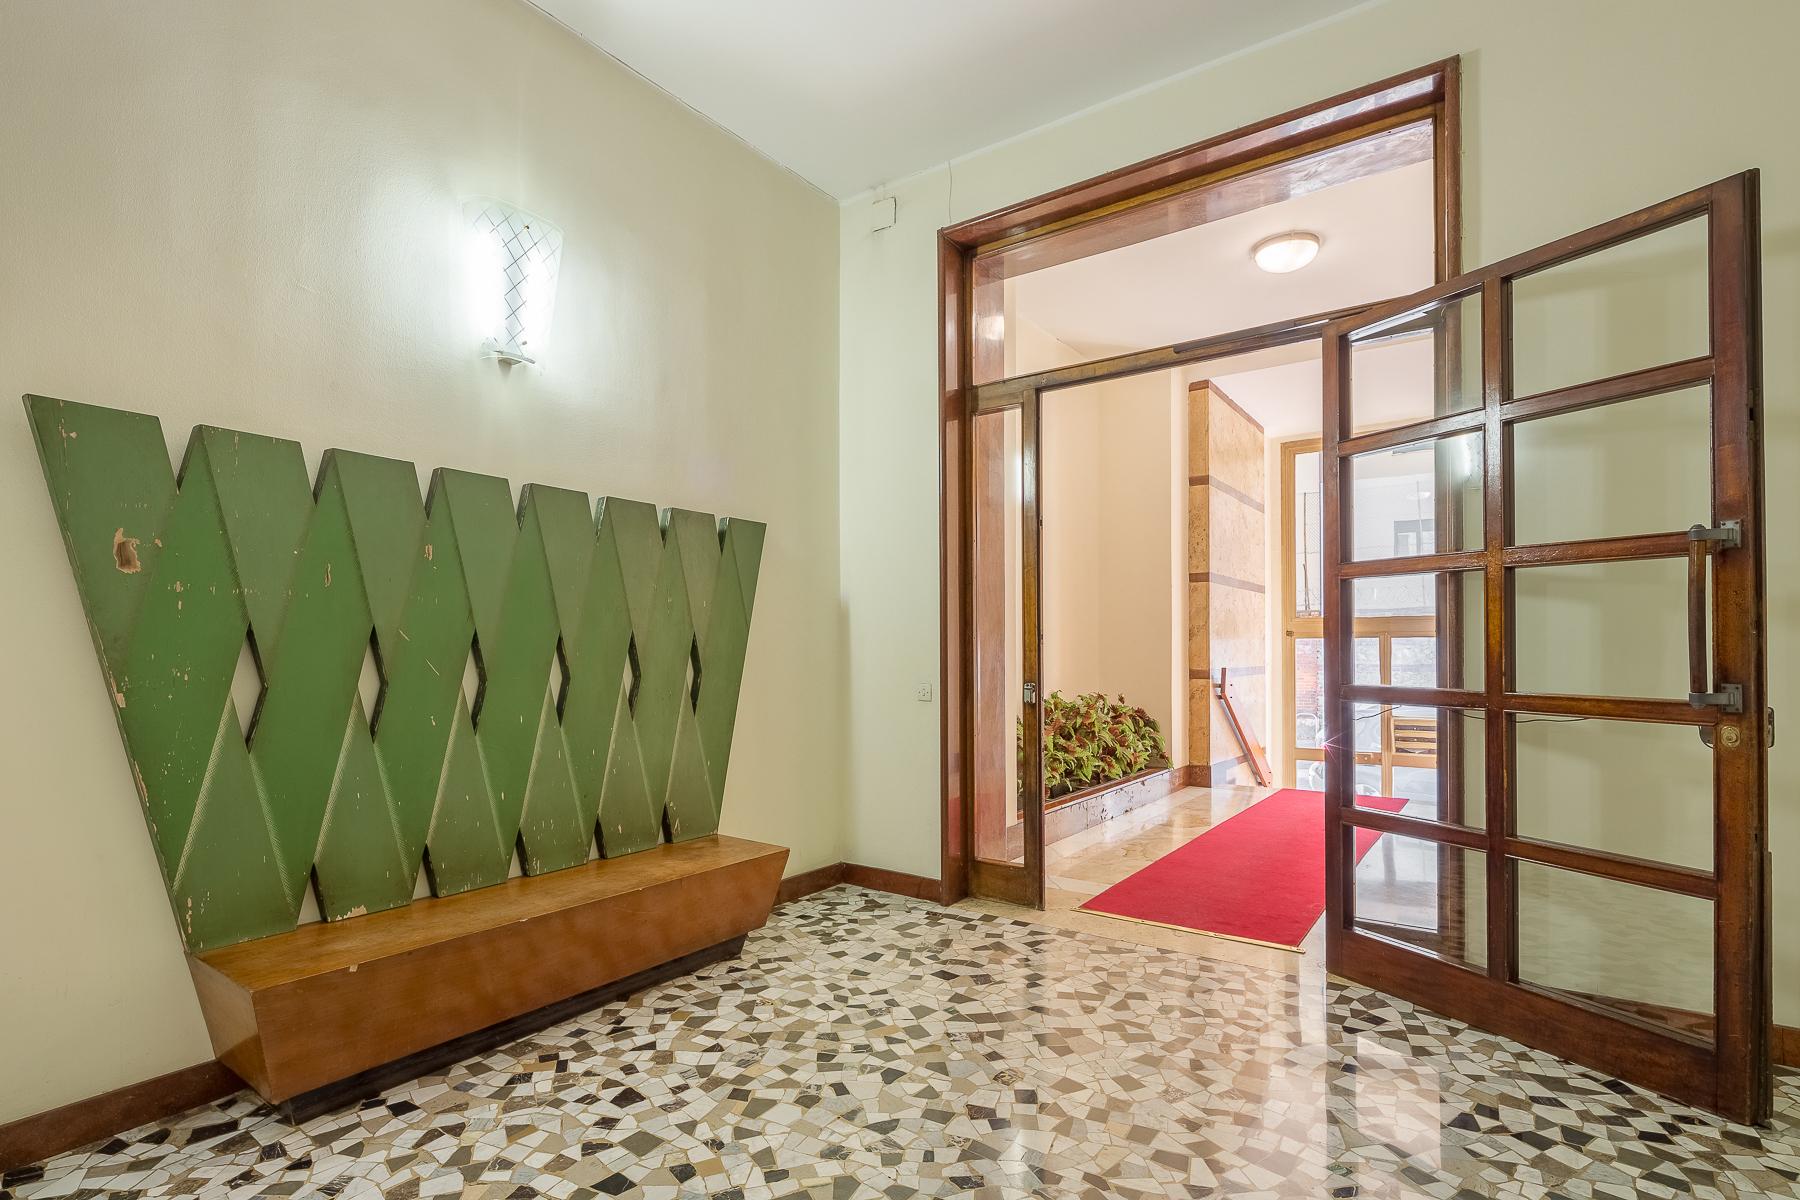 Elegant apartment with private garden in a small building designed by the architect Portaluppi - 46